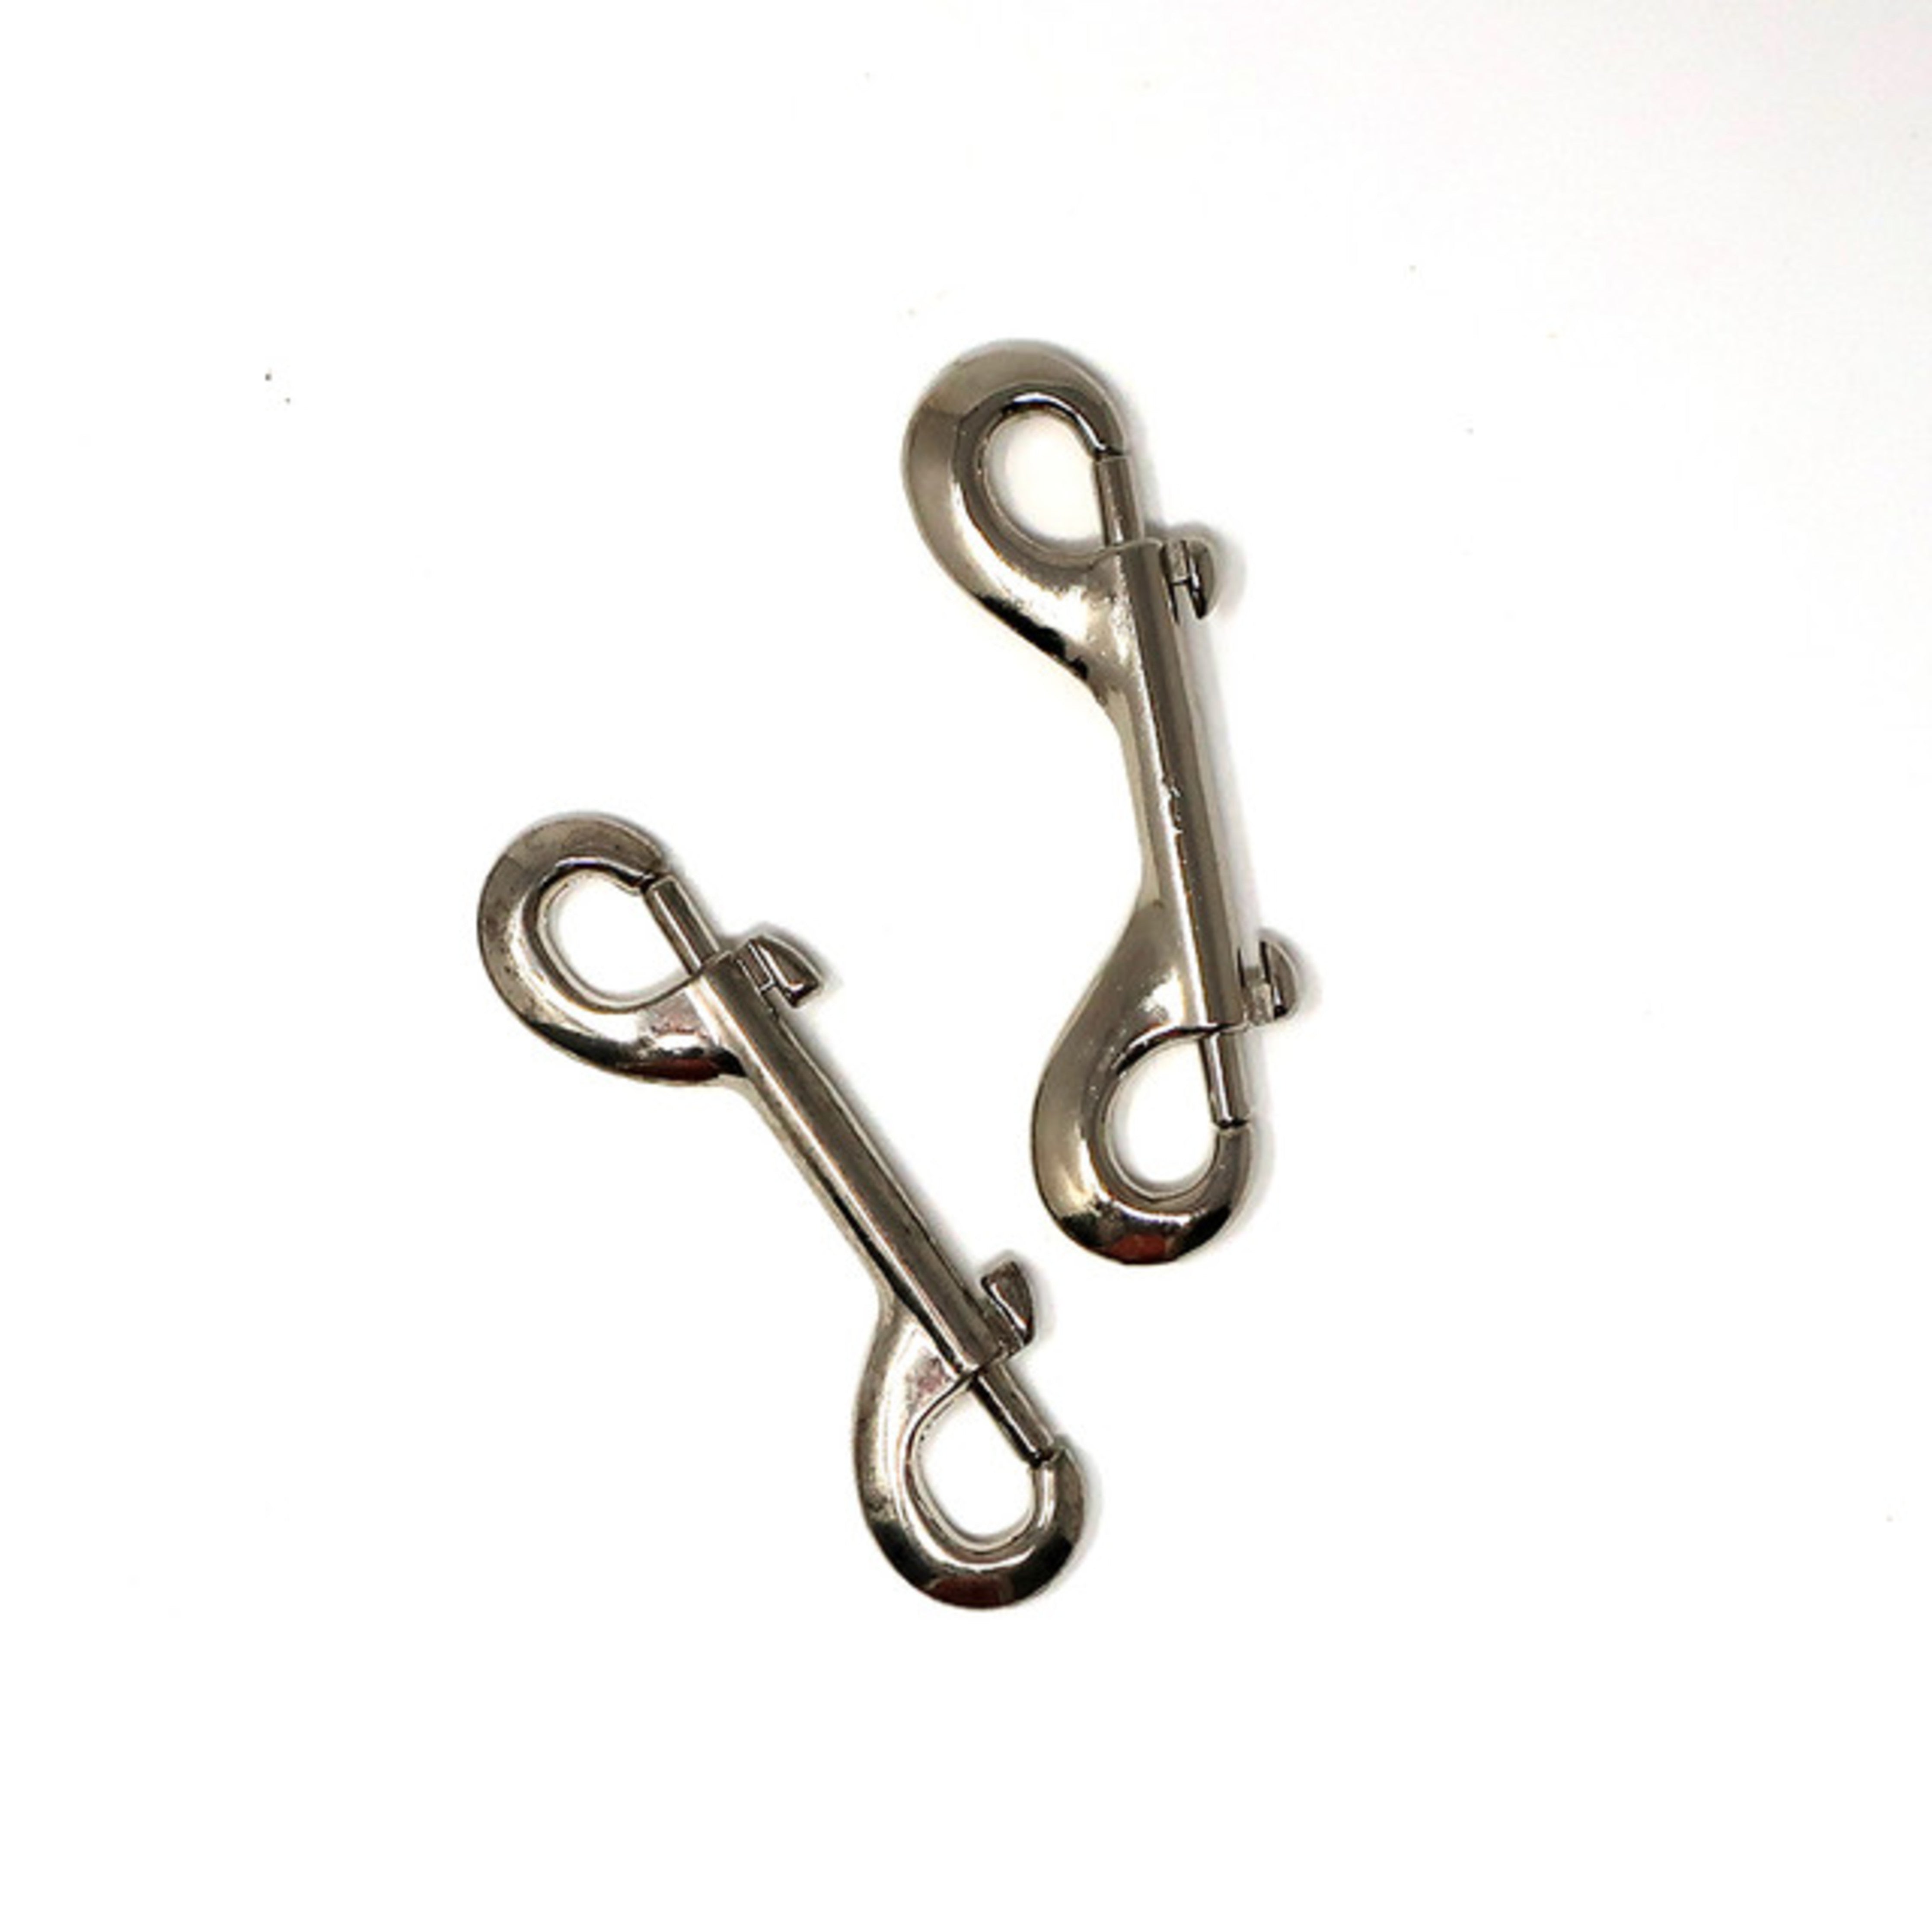 Double-End Nickel-Plated Snap 4.75"